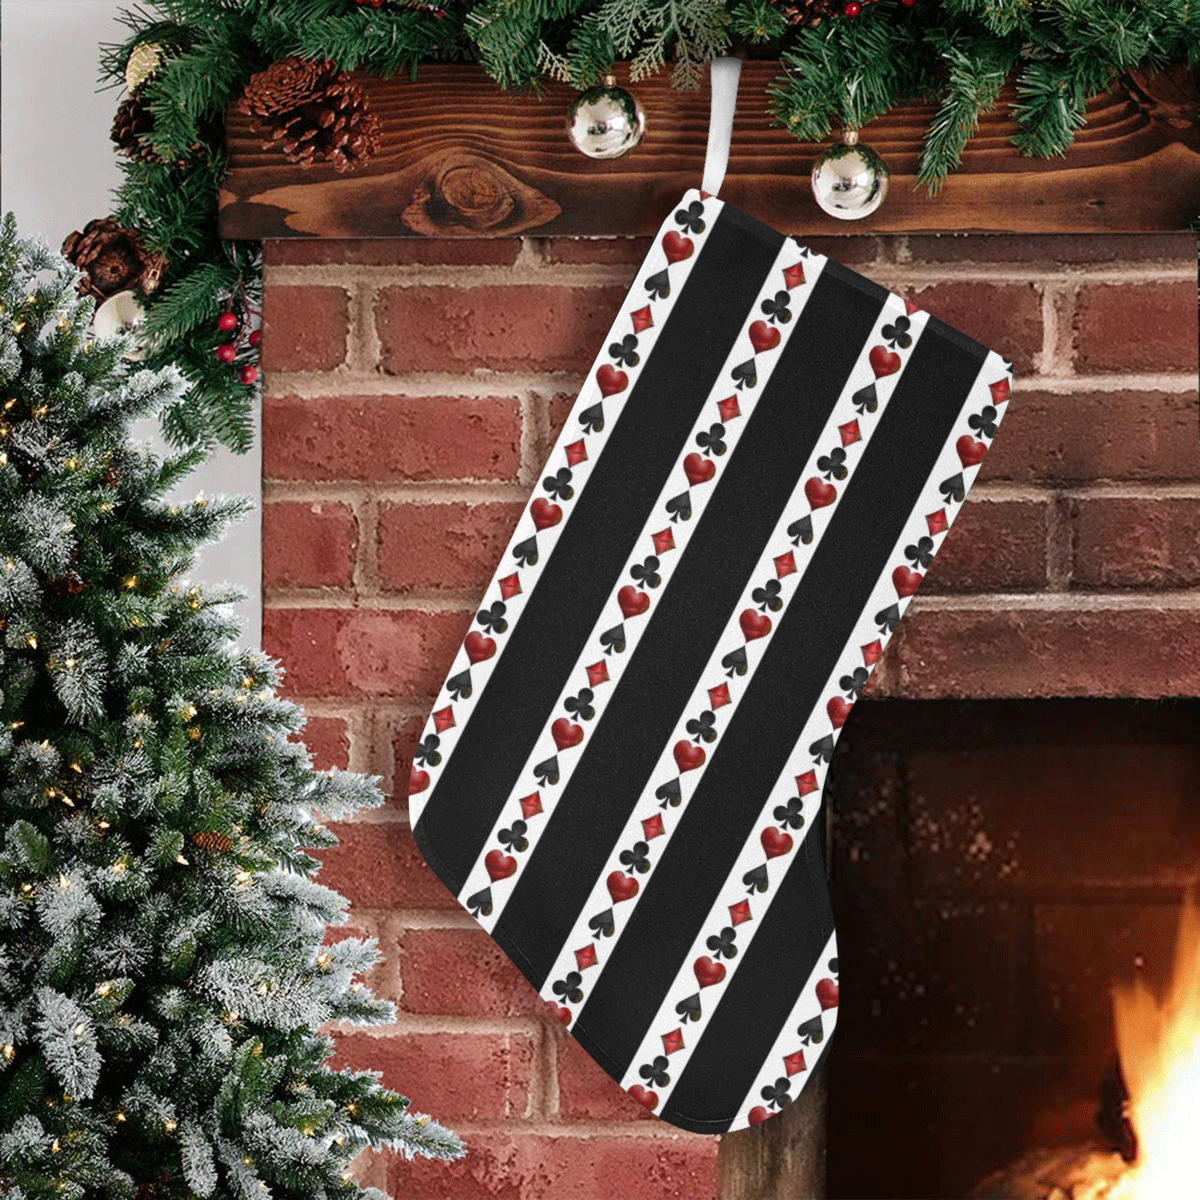 Playing Card Symbols Stripes Christmas Stocking (Without Folded Top)